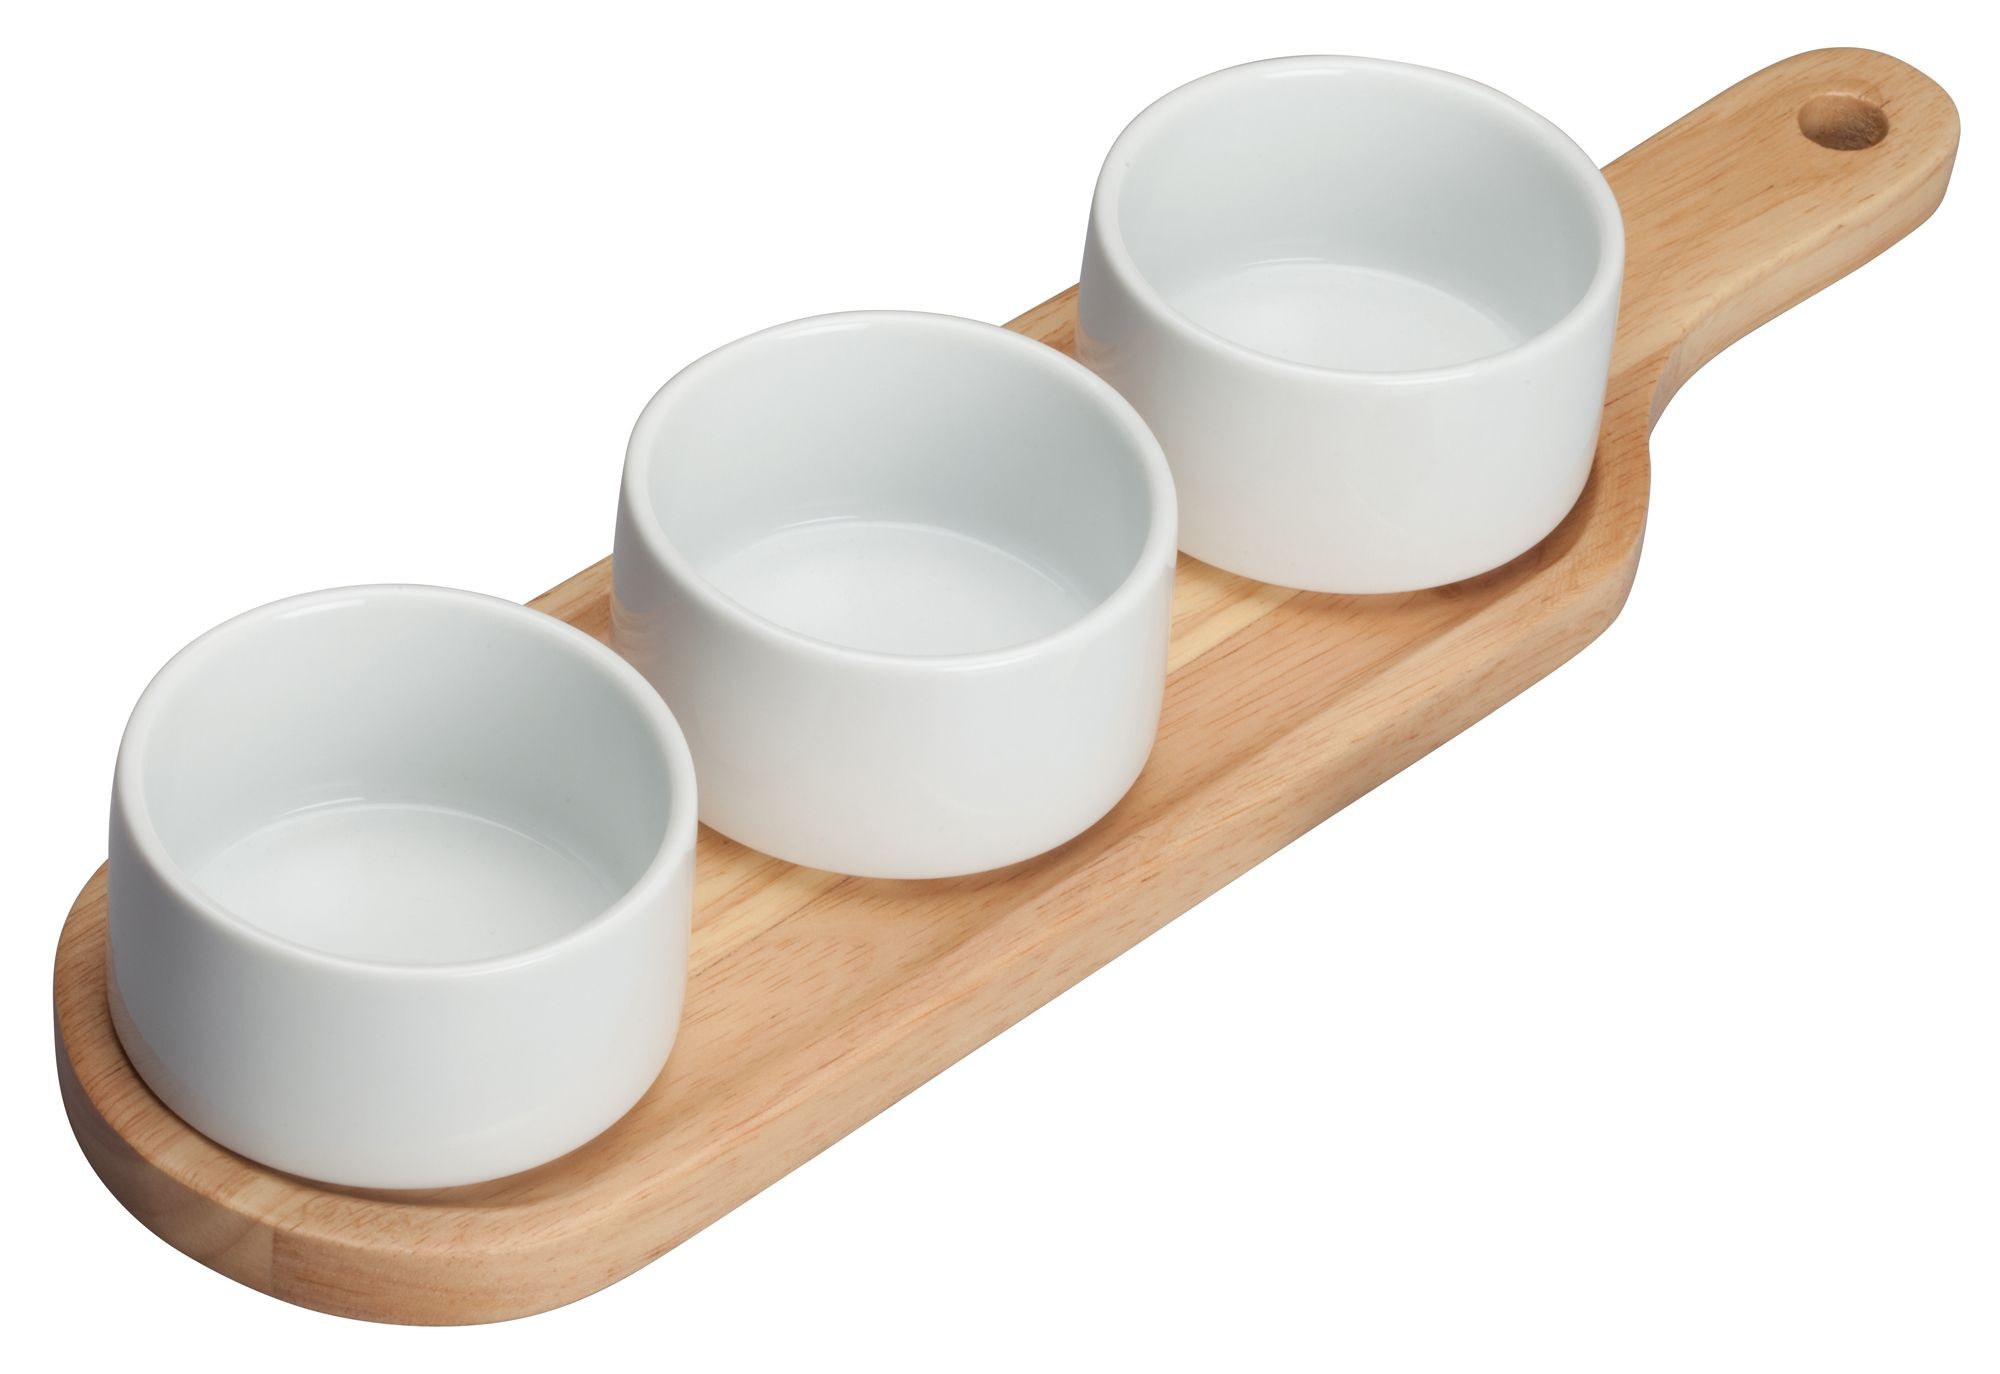 Winco WDP015-104 Newry Porcelain Trio Bowl Set with Wooden Plate 15-1/4" x 4-1/8"